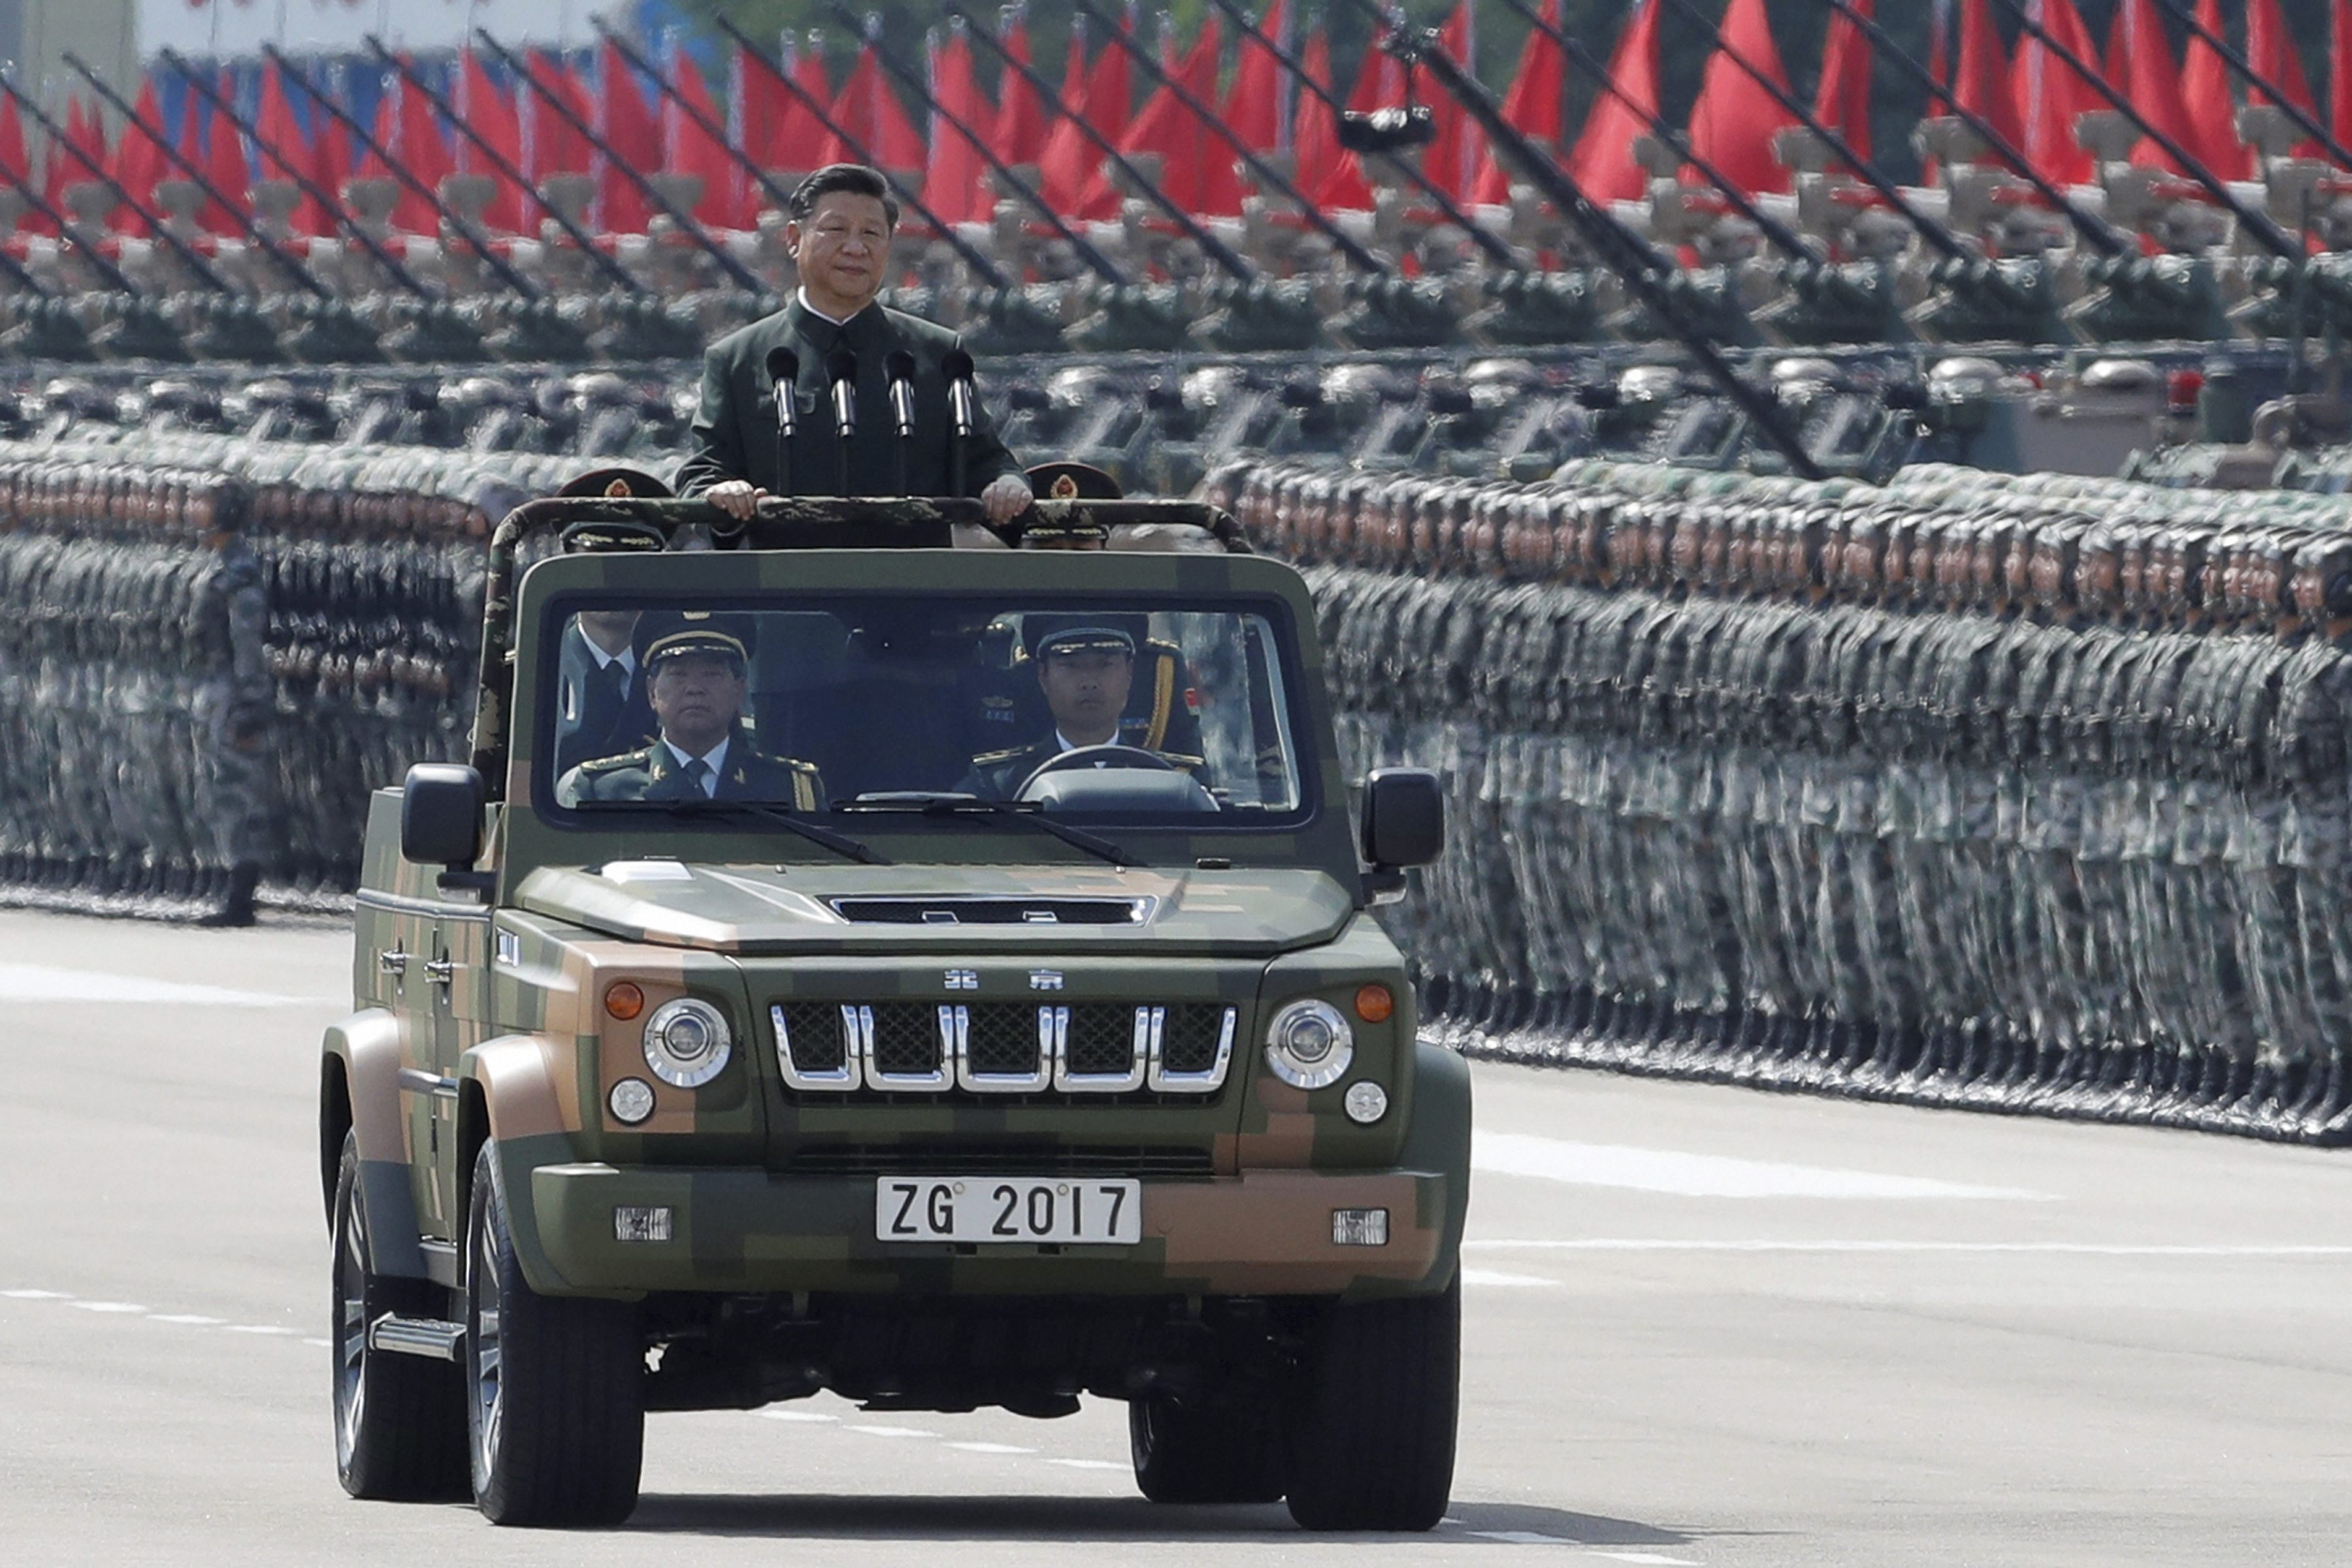 Hong Kong : Chinese President Xi Jinping inspects the People's Liberation Army of the Hong Kong Garrison at the Shek Kong Barracks in Hong Kong, Friday, June 30, 2017. Chinese President Xi Jinping landed in Hong Kong Thursday to mark the 20th anniversary of Beijing taking control of the former British colony, accompanied by a formidable layer of security as authorities showed little patience for pro-democracy protests. AP/PTI(AP6_30_2017_000021B)